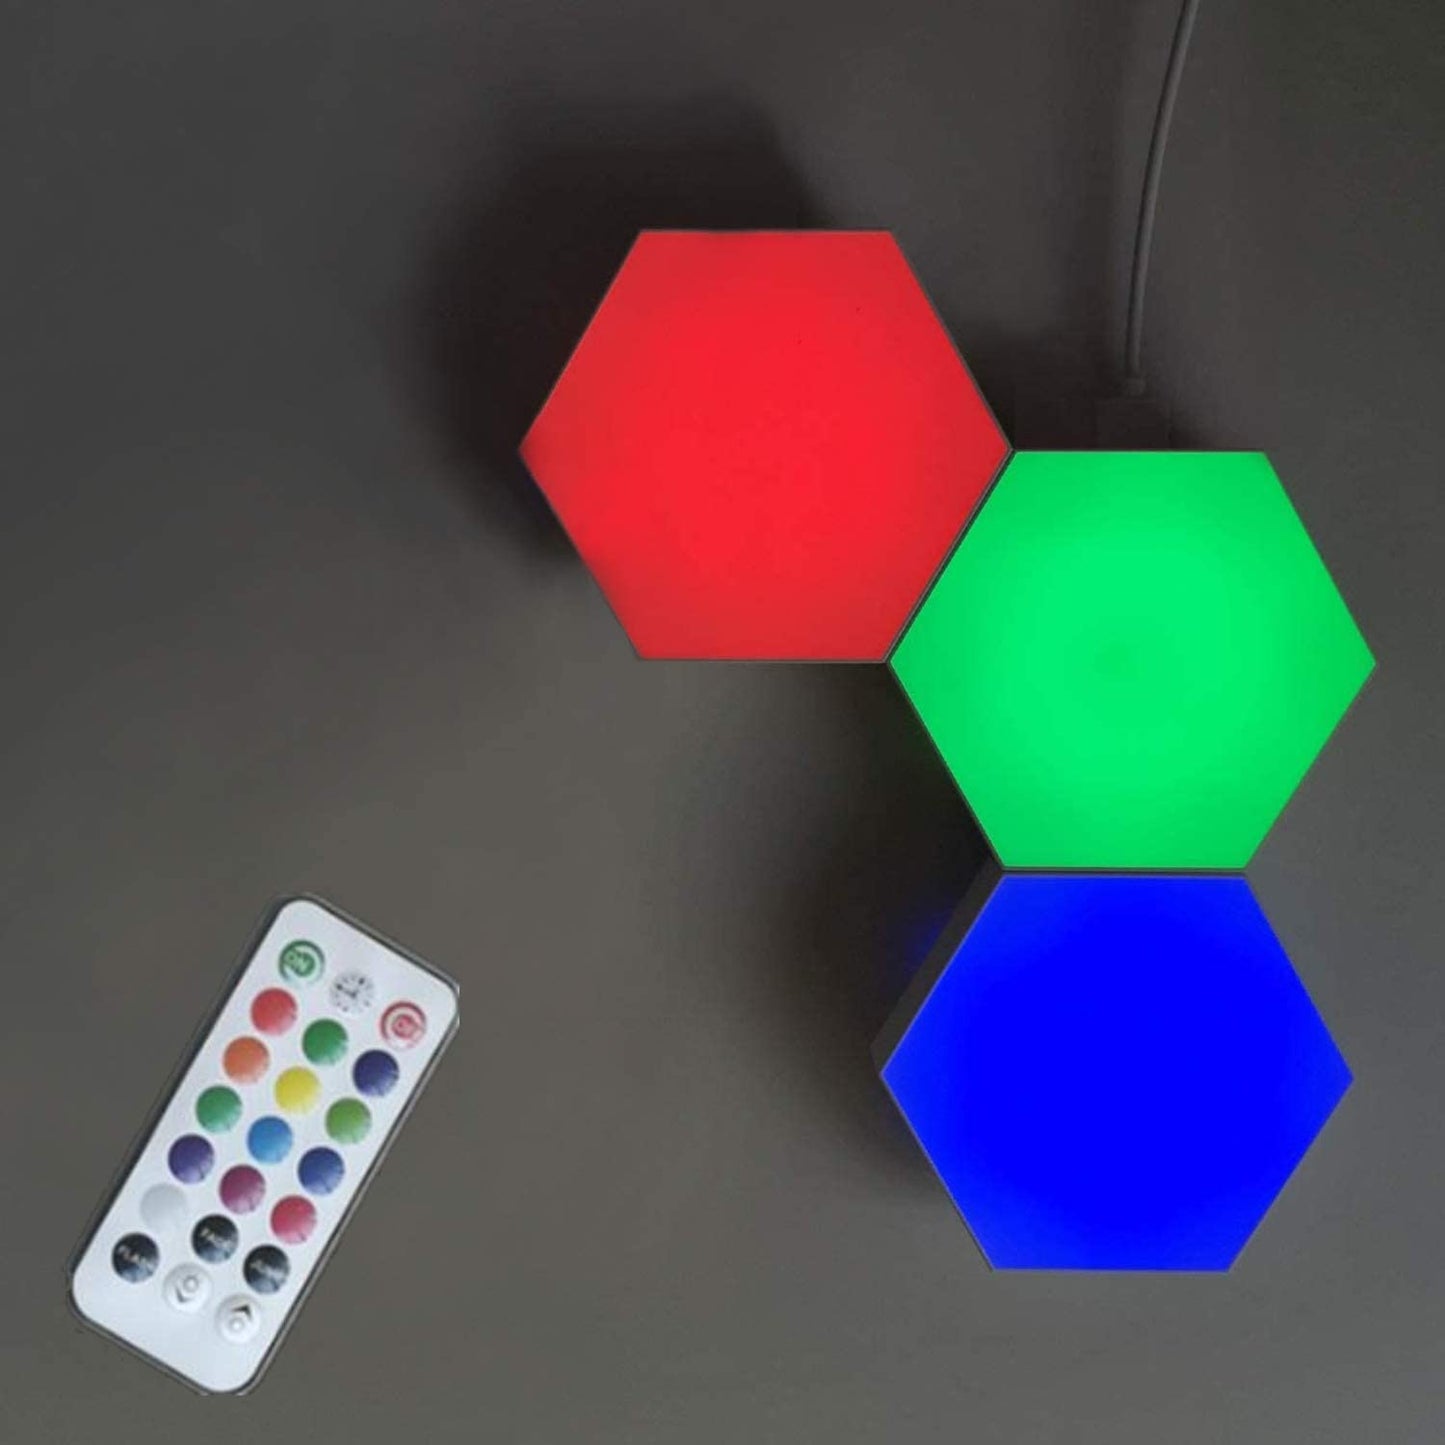 Multicolor Hexagonal Wall Modular Touch Sensitive Lights (Pack of 6) - Coral Tree 